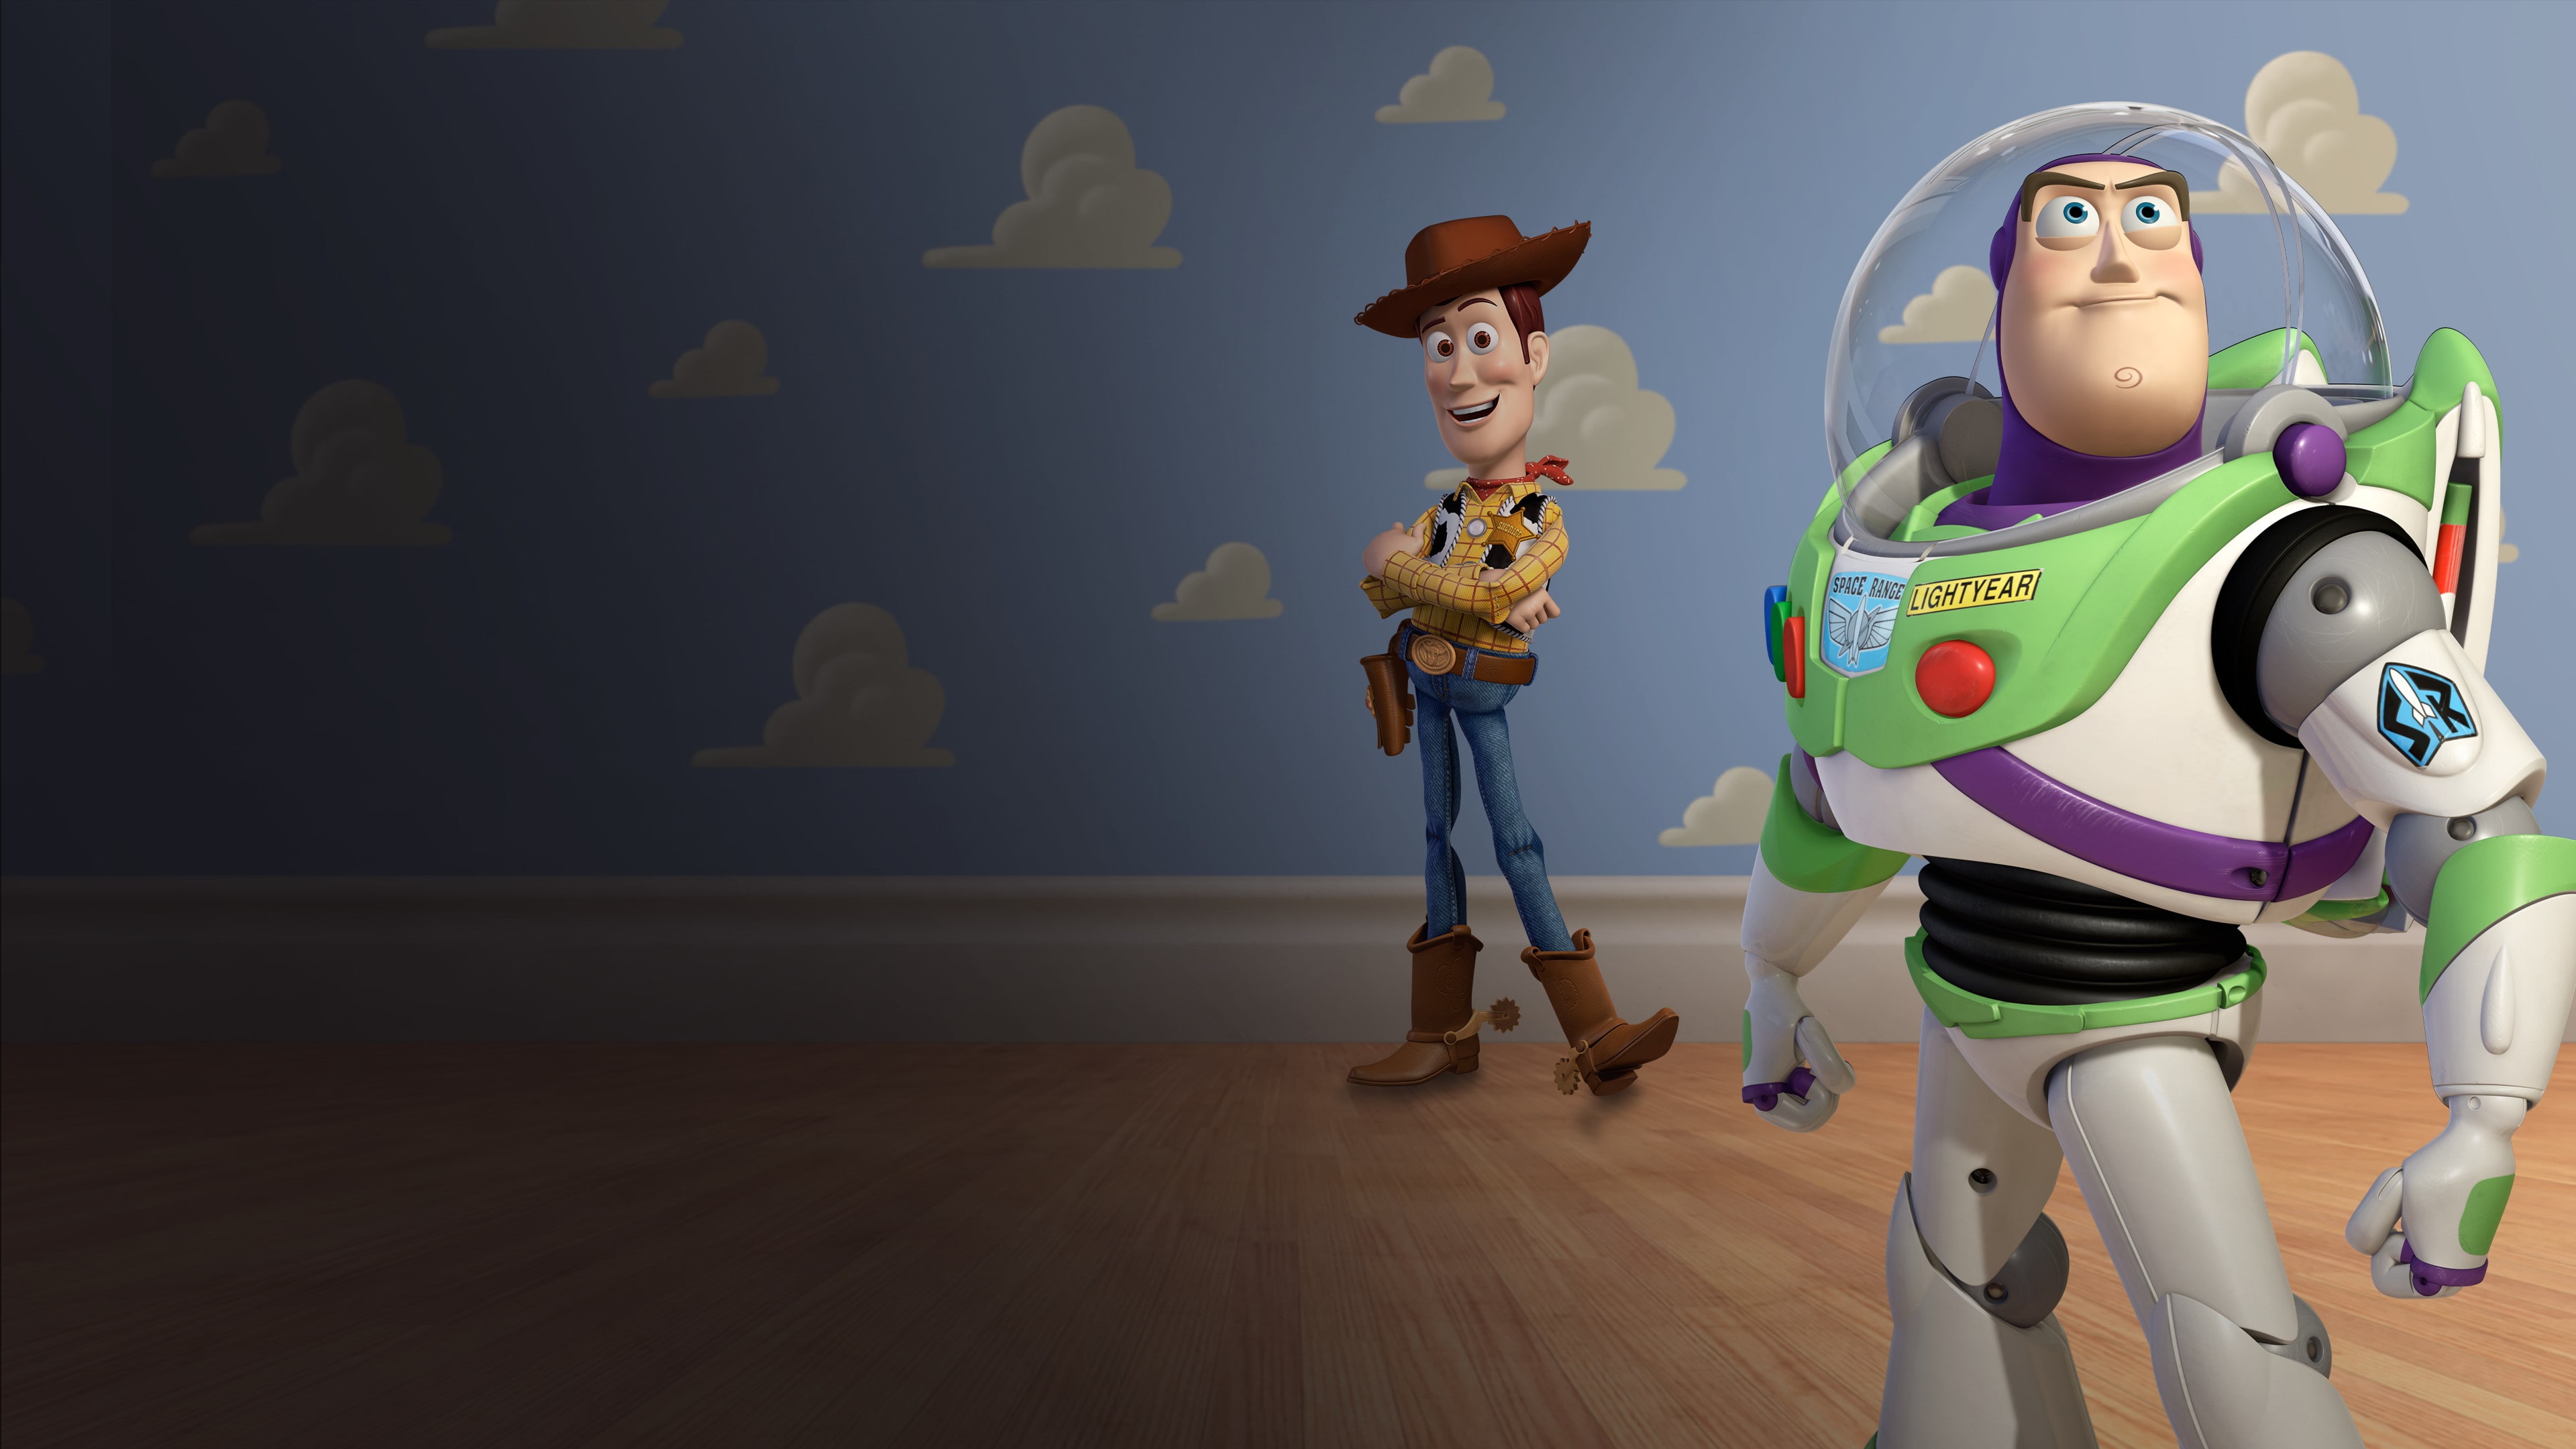 Toy Story 3 - Ps2 Classic - Jogos Ps3 Psn